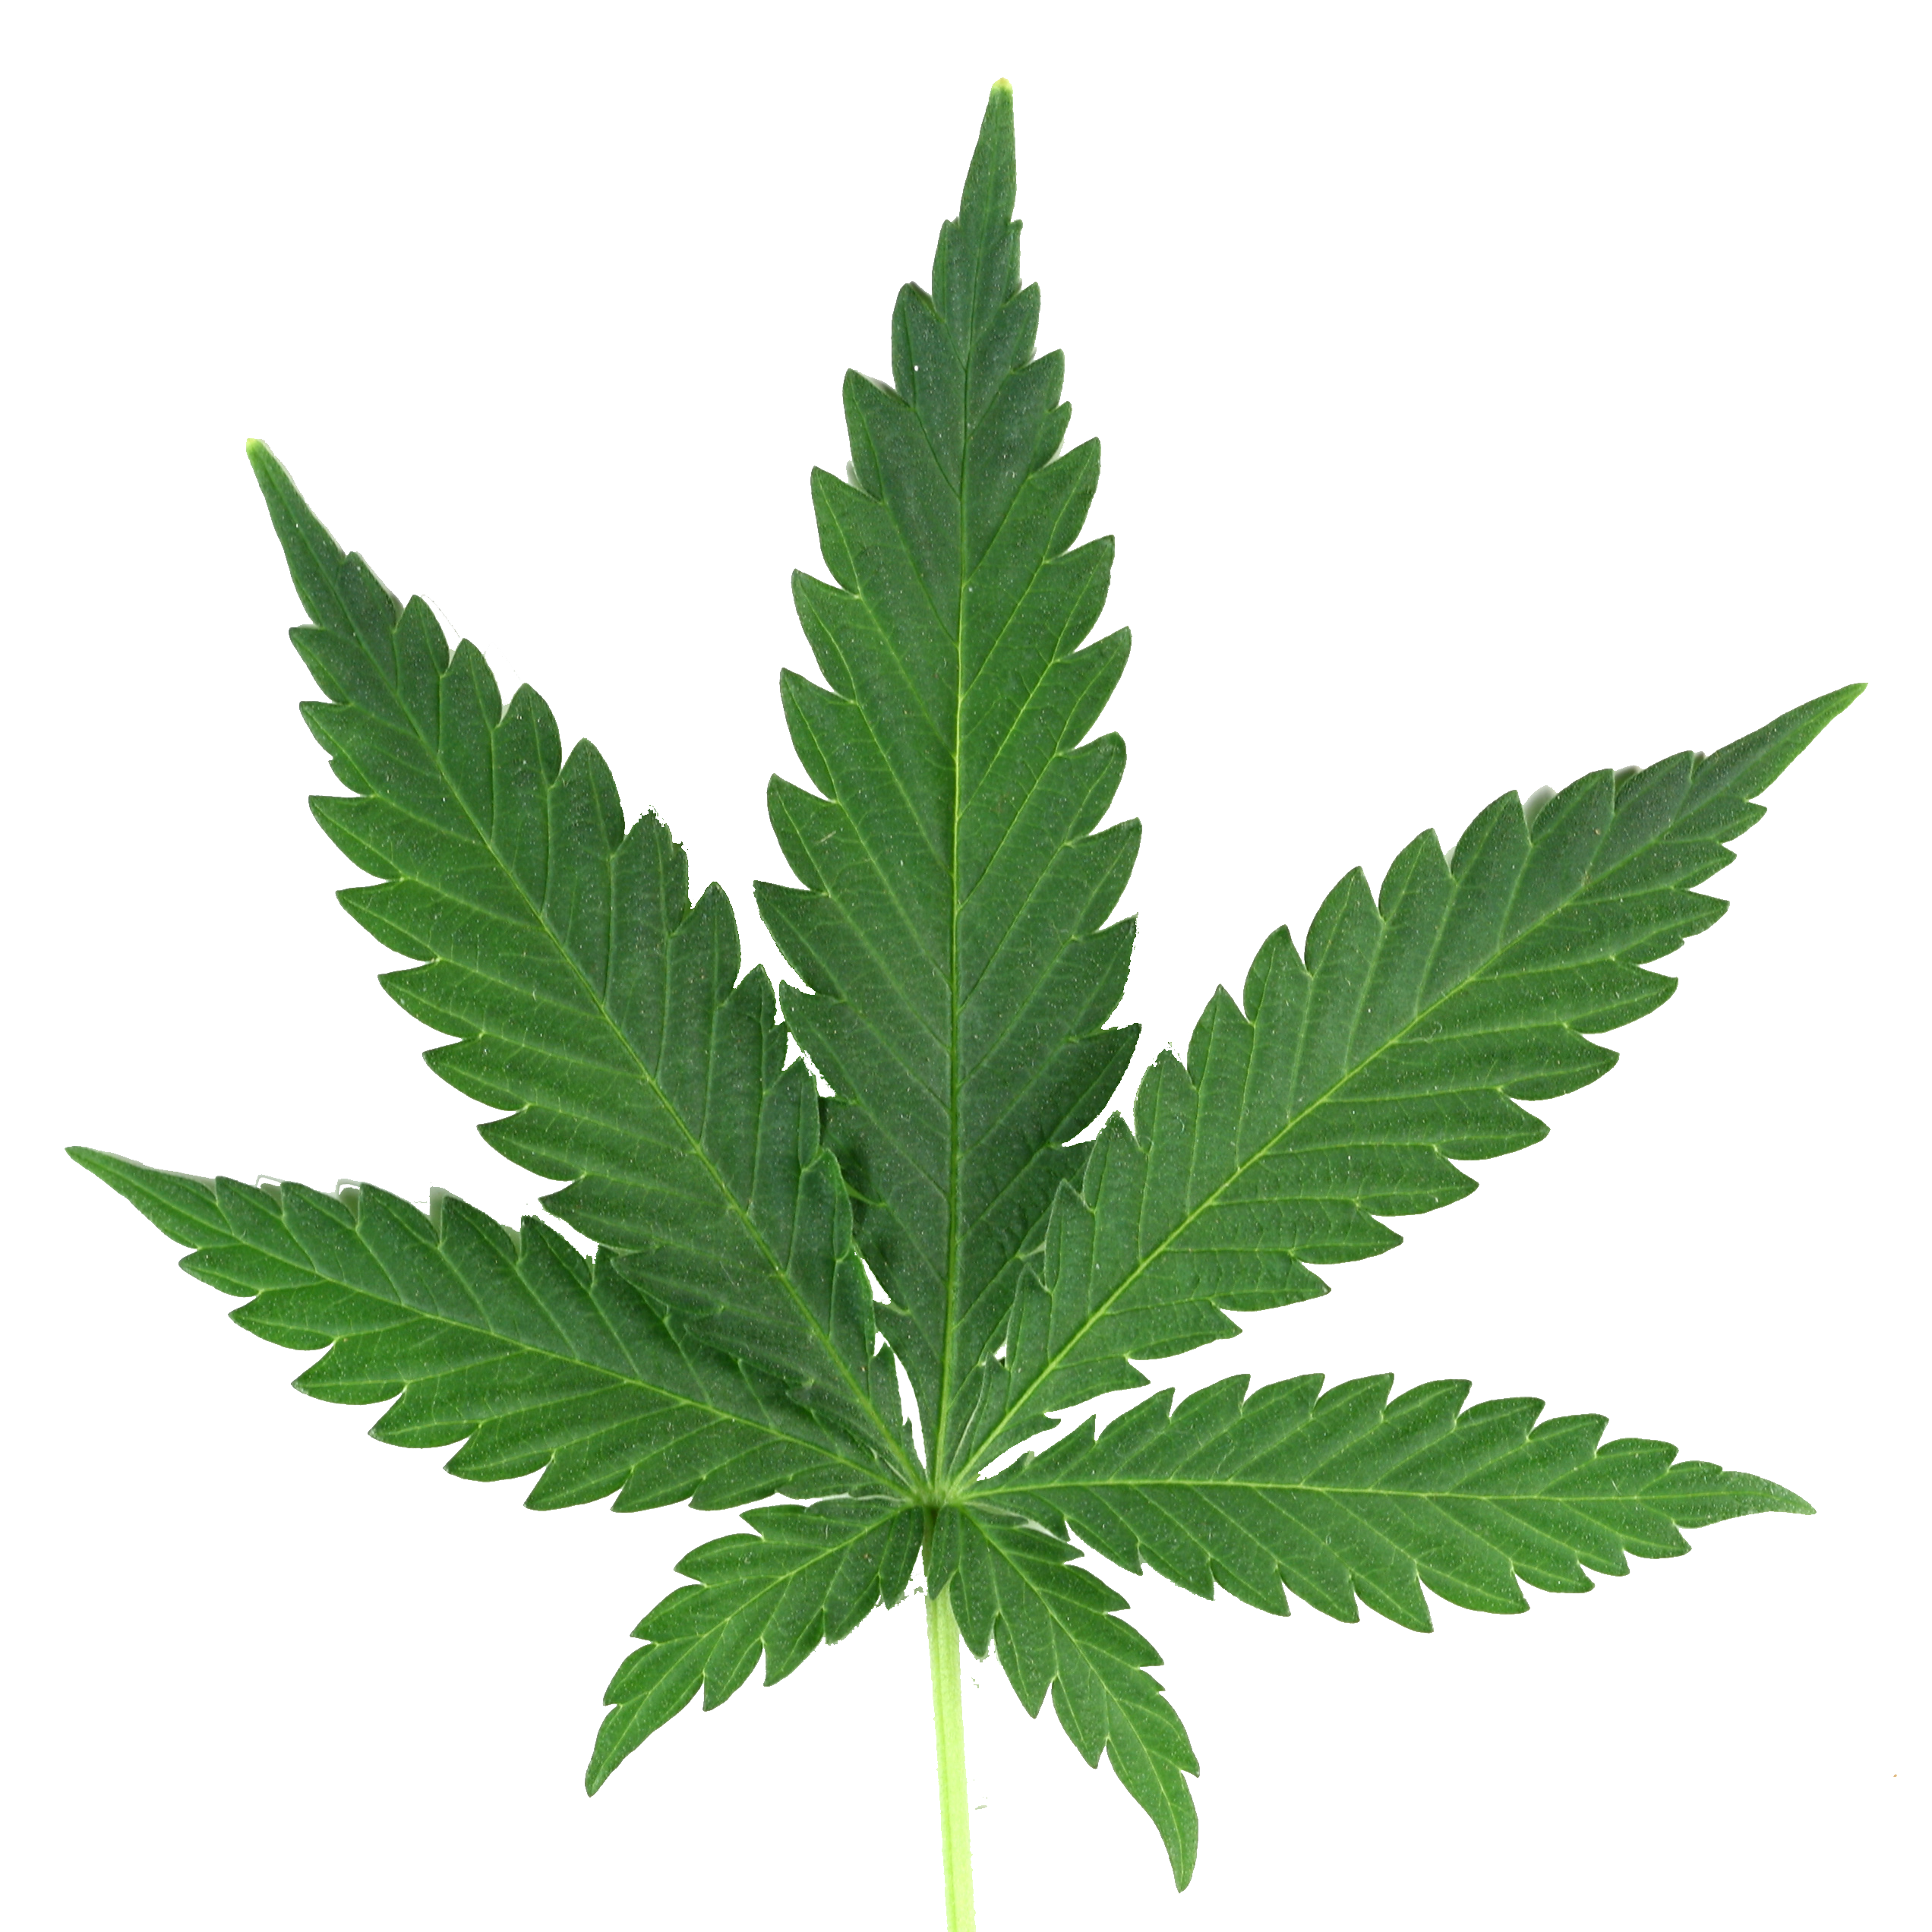 Hd transparent images pluspng. Smoke weed png